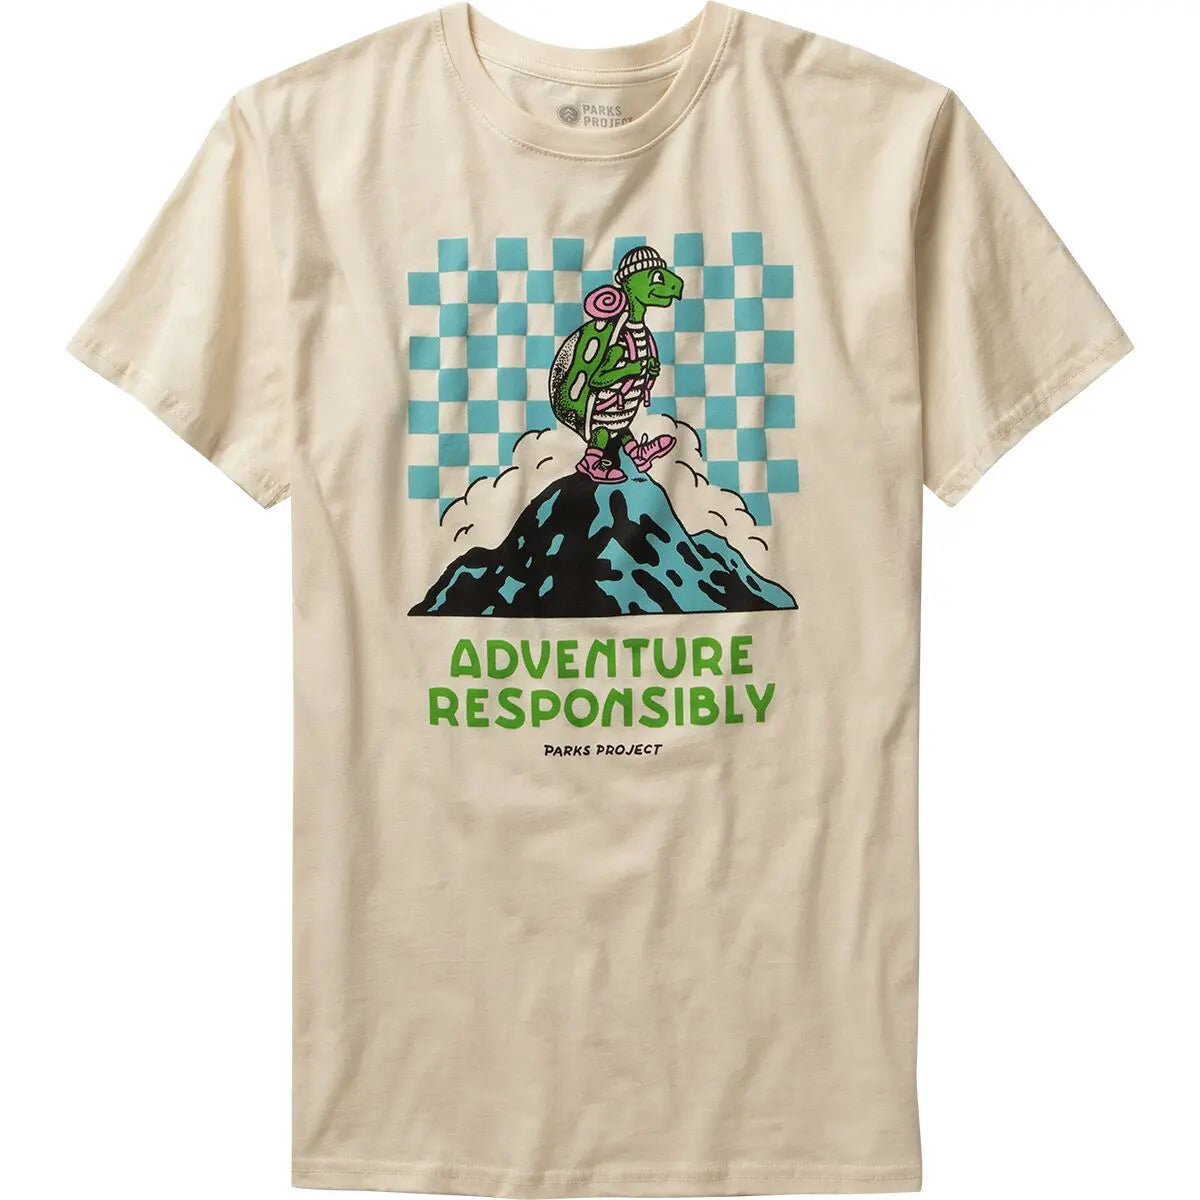 Parks Project Peak Bagger Adventure Responsibly Tee